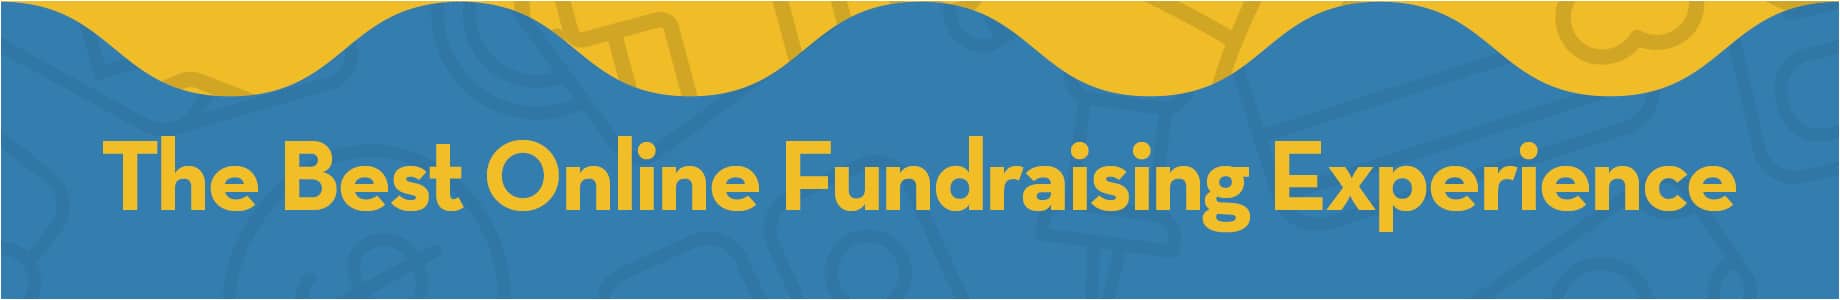 The Best Online Fundraising Experience